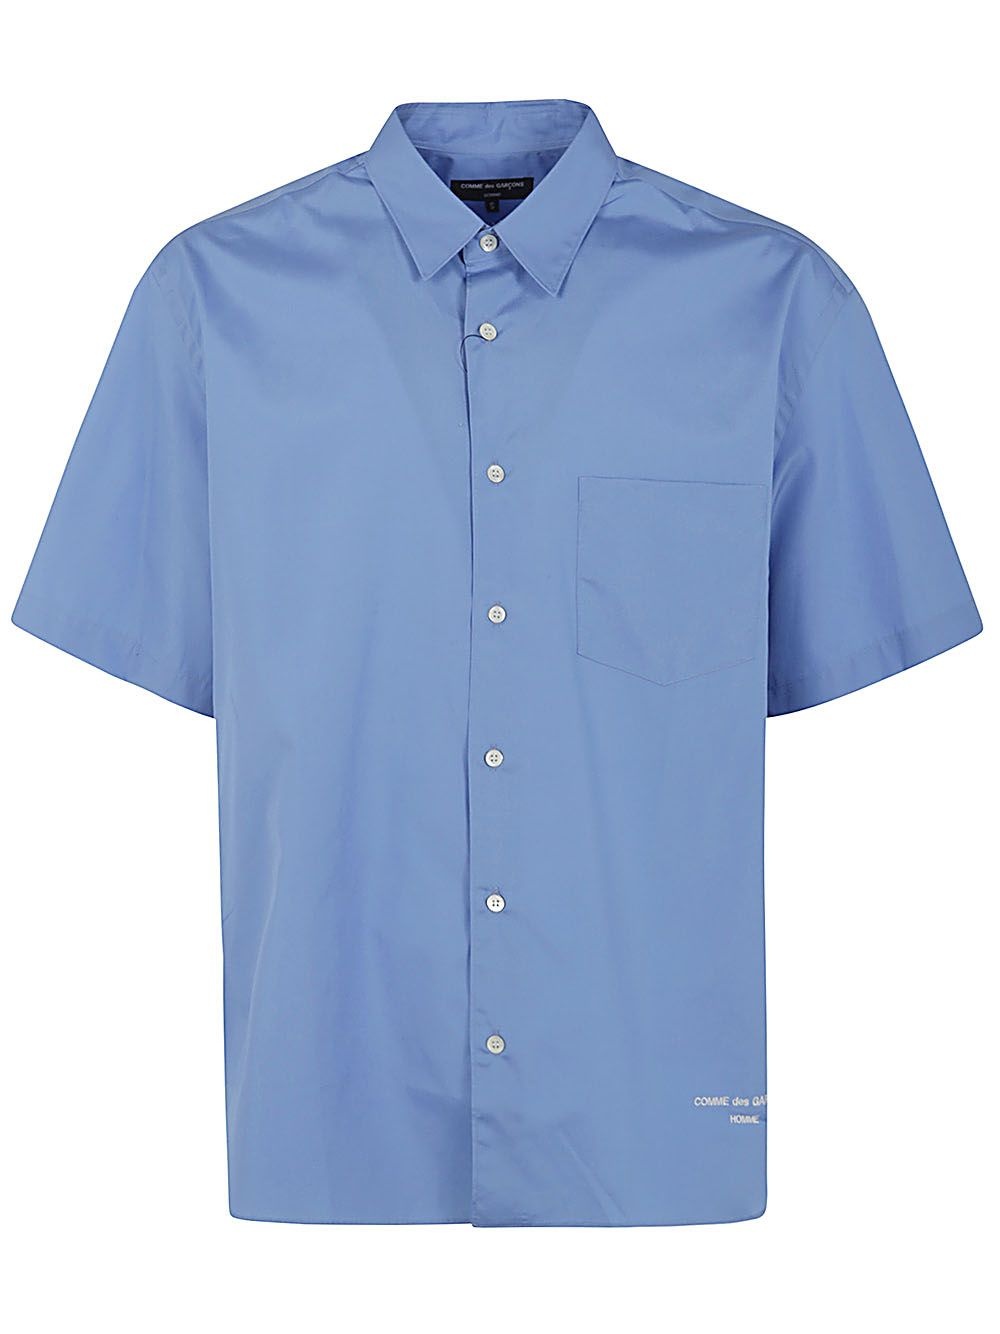 ICONIC COTTON SHIRT WITH LOGO - 1